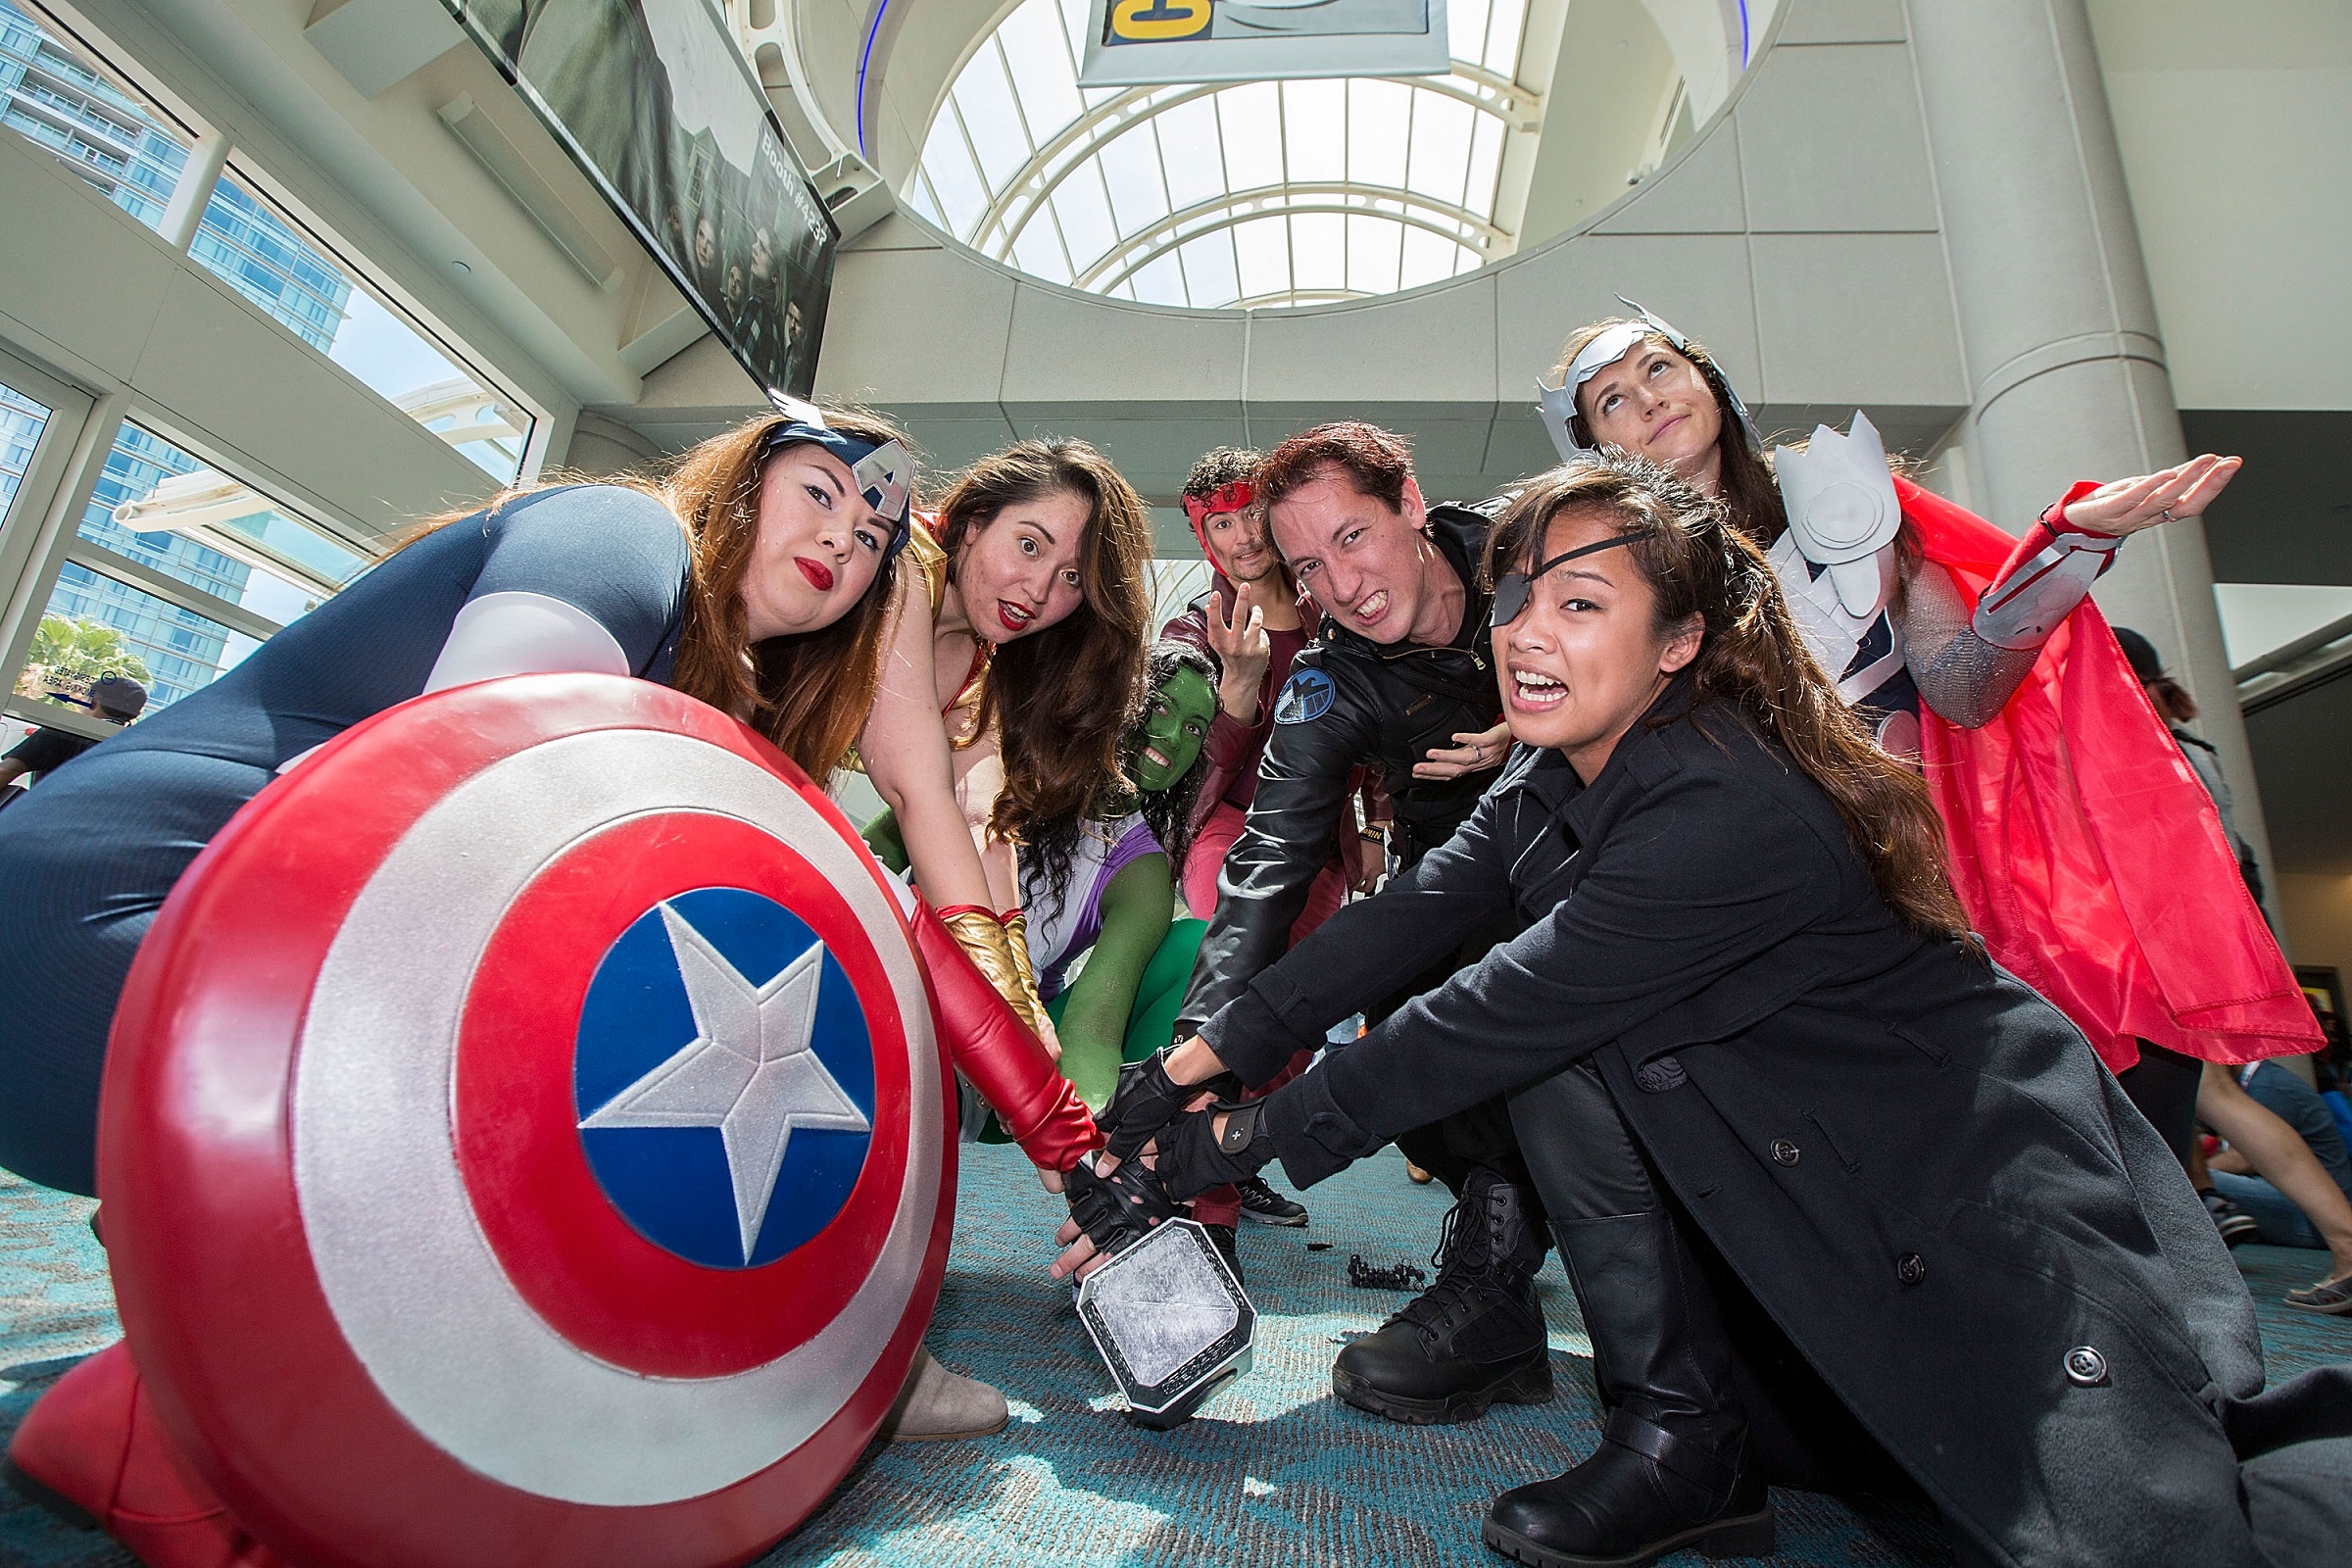 ComicCon 2015 10 Highlights from the San Diego convention